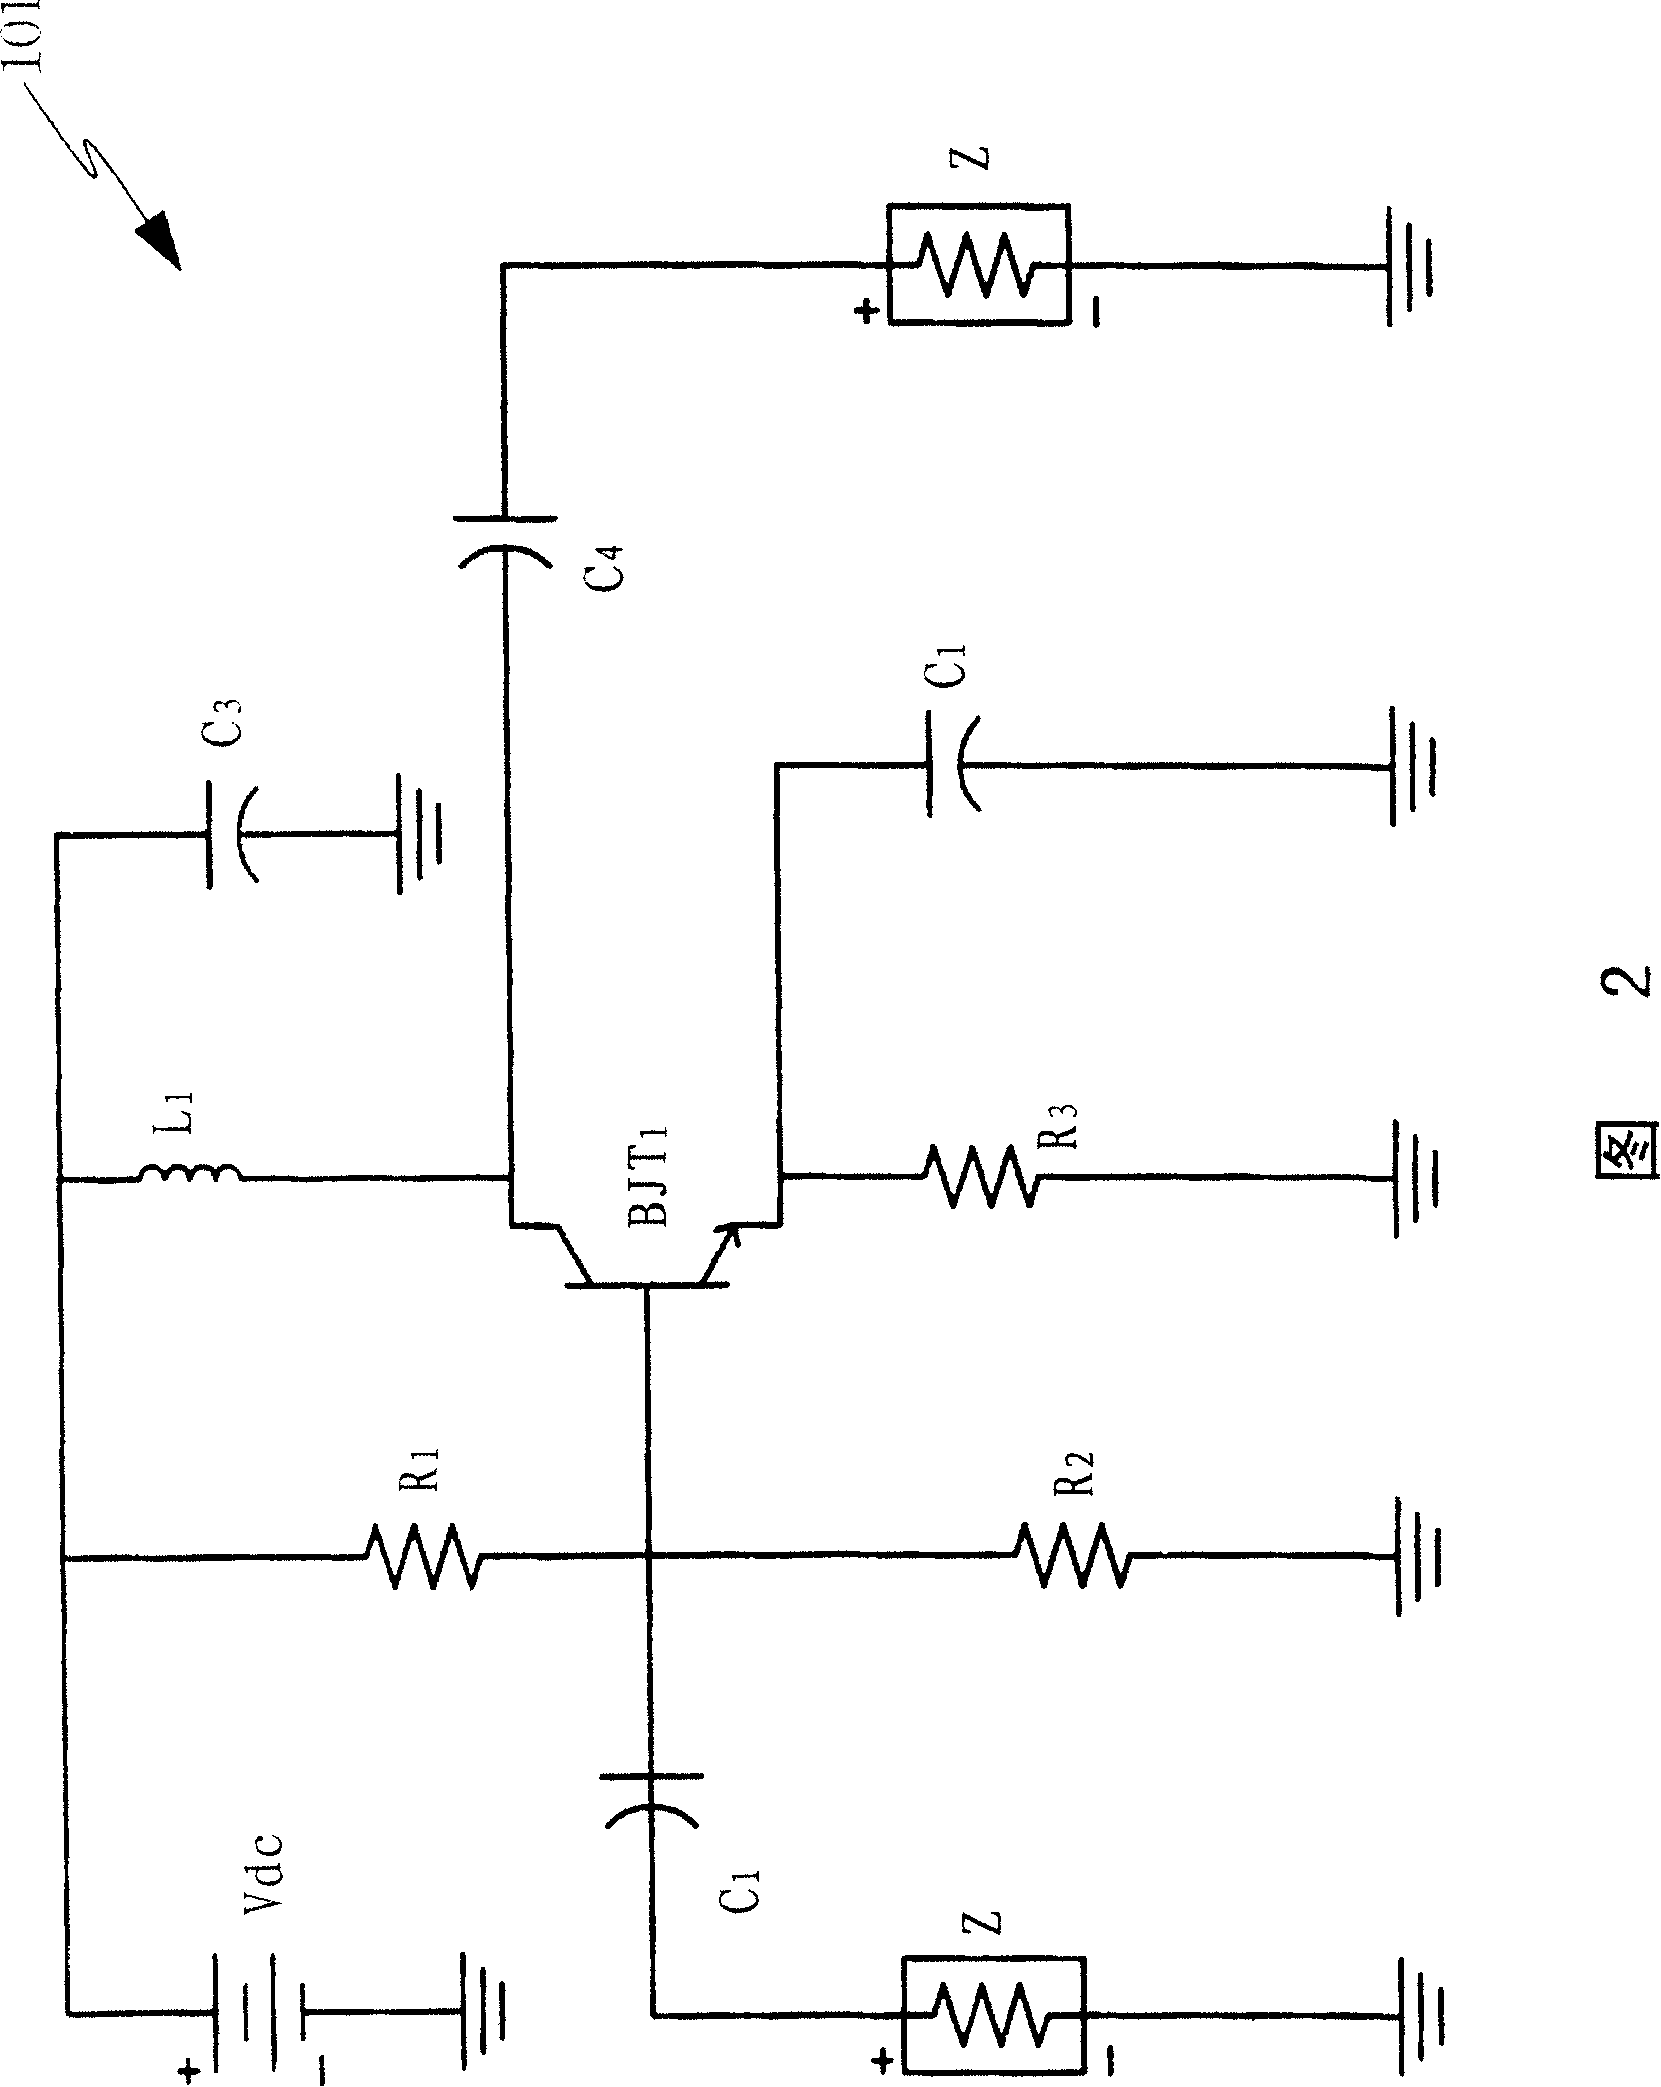 Frequency modulation system circuit